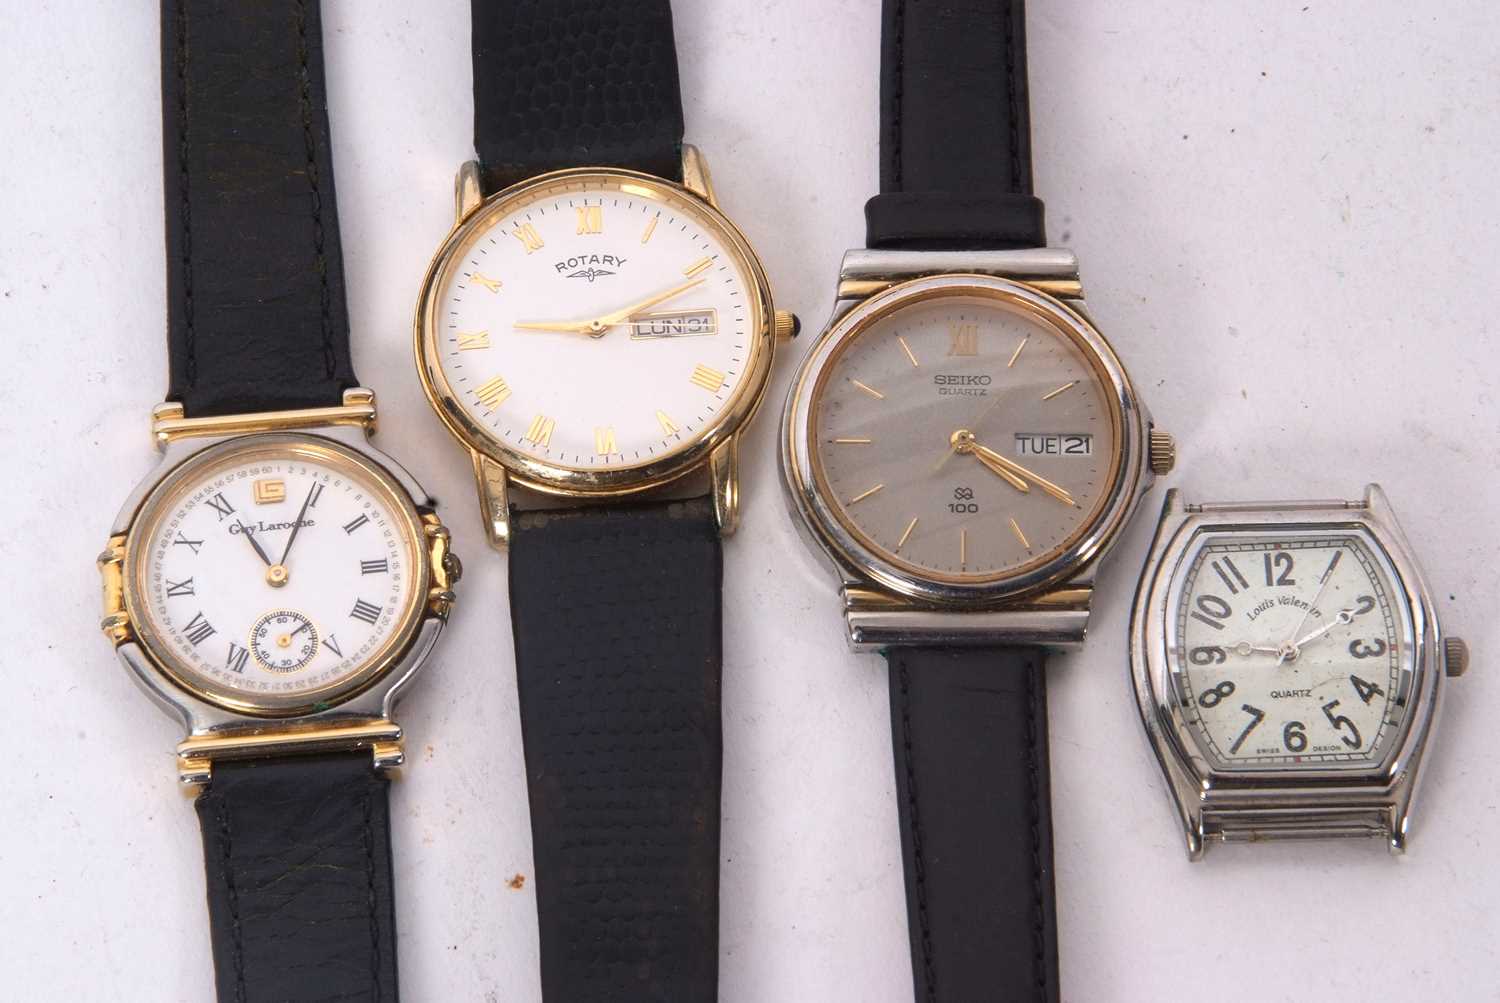 Mixed Lot: Four gents wristwatches, one Seiko, one Rotary and one Guy Loroche and one other